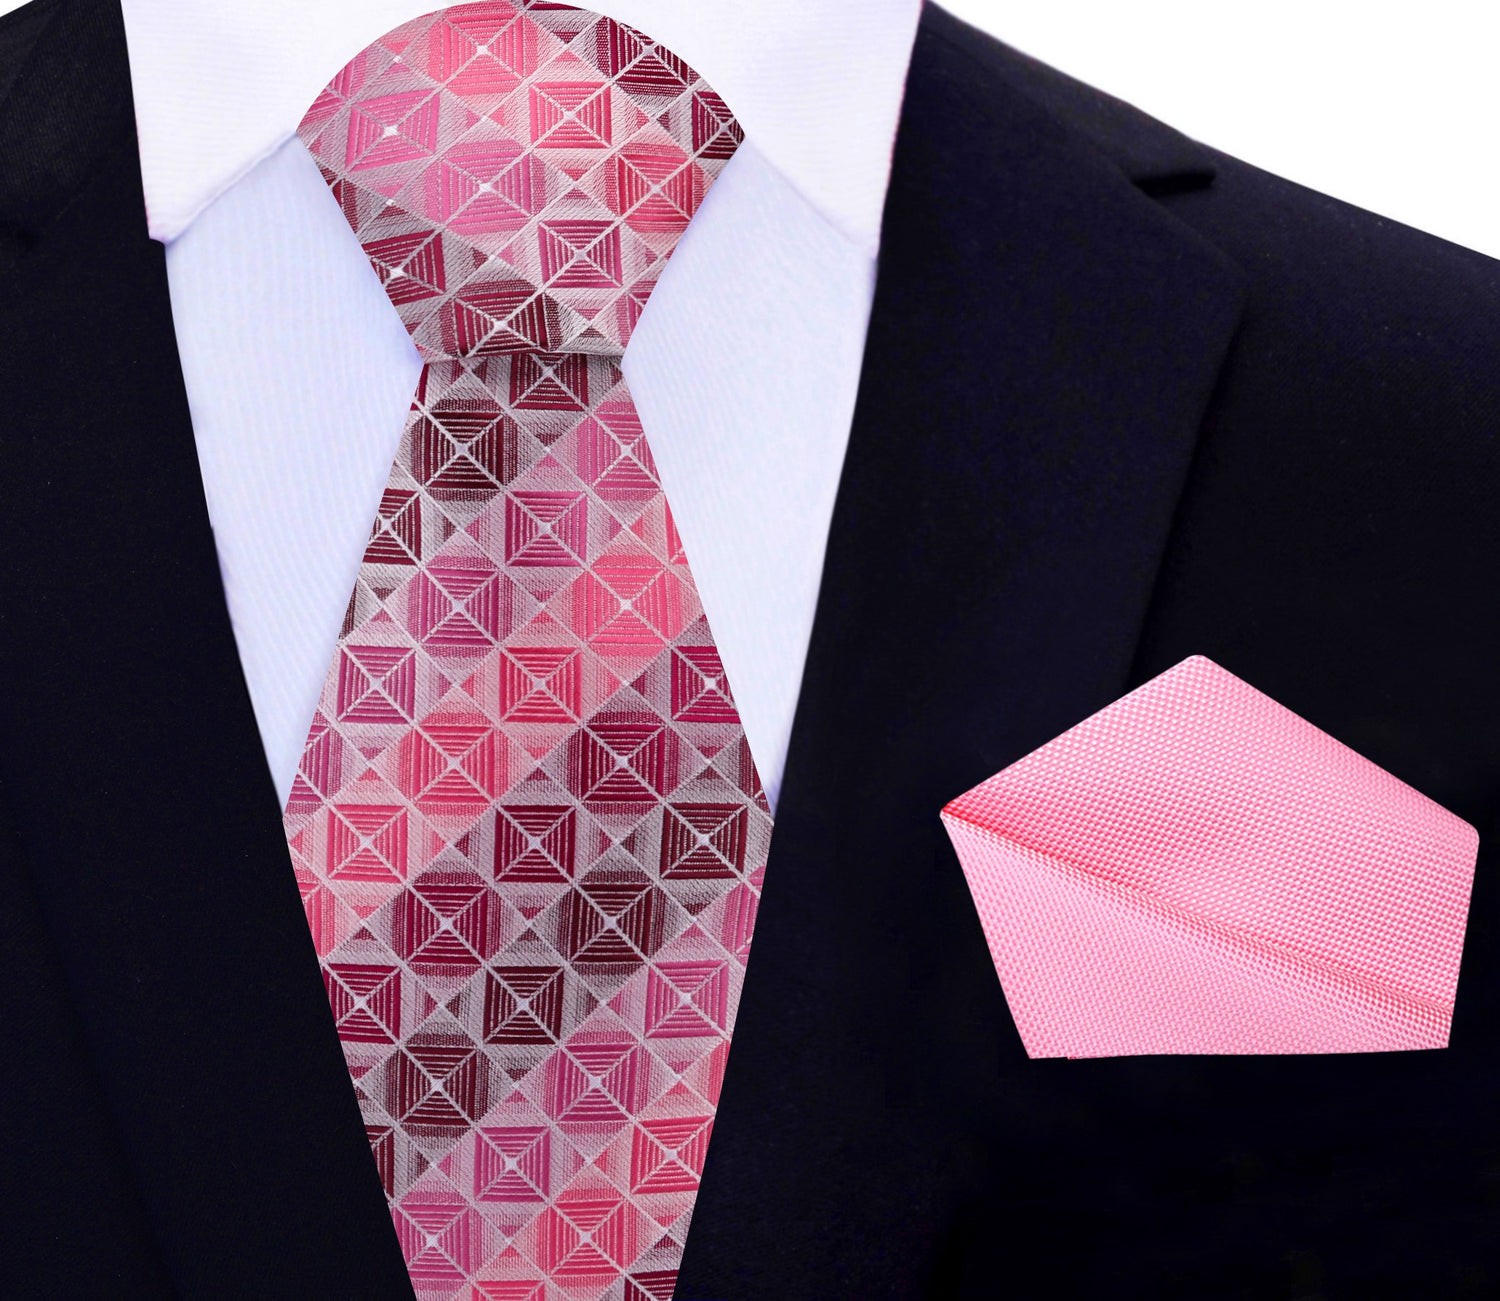 Shades of Pink and Red Geometric Blocks Necktie and Pink pocket Square